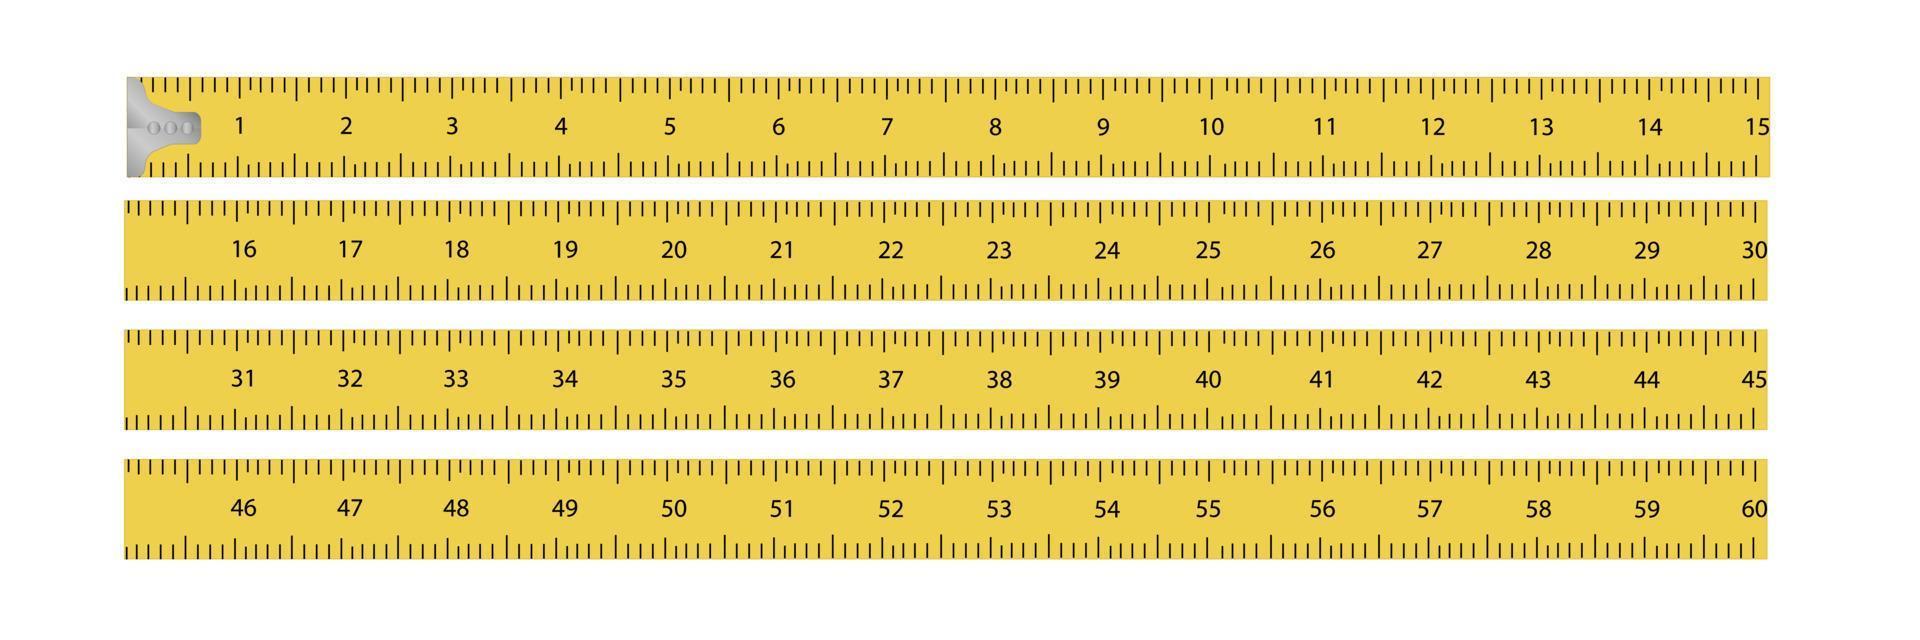 Yellow realistic Ruler Measuring scale, 60 centimeters. Vector illustration flat design isolated on white background.